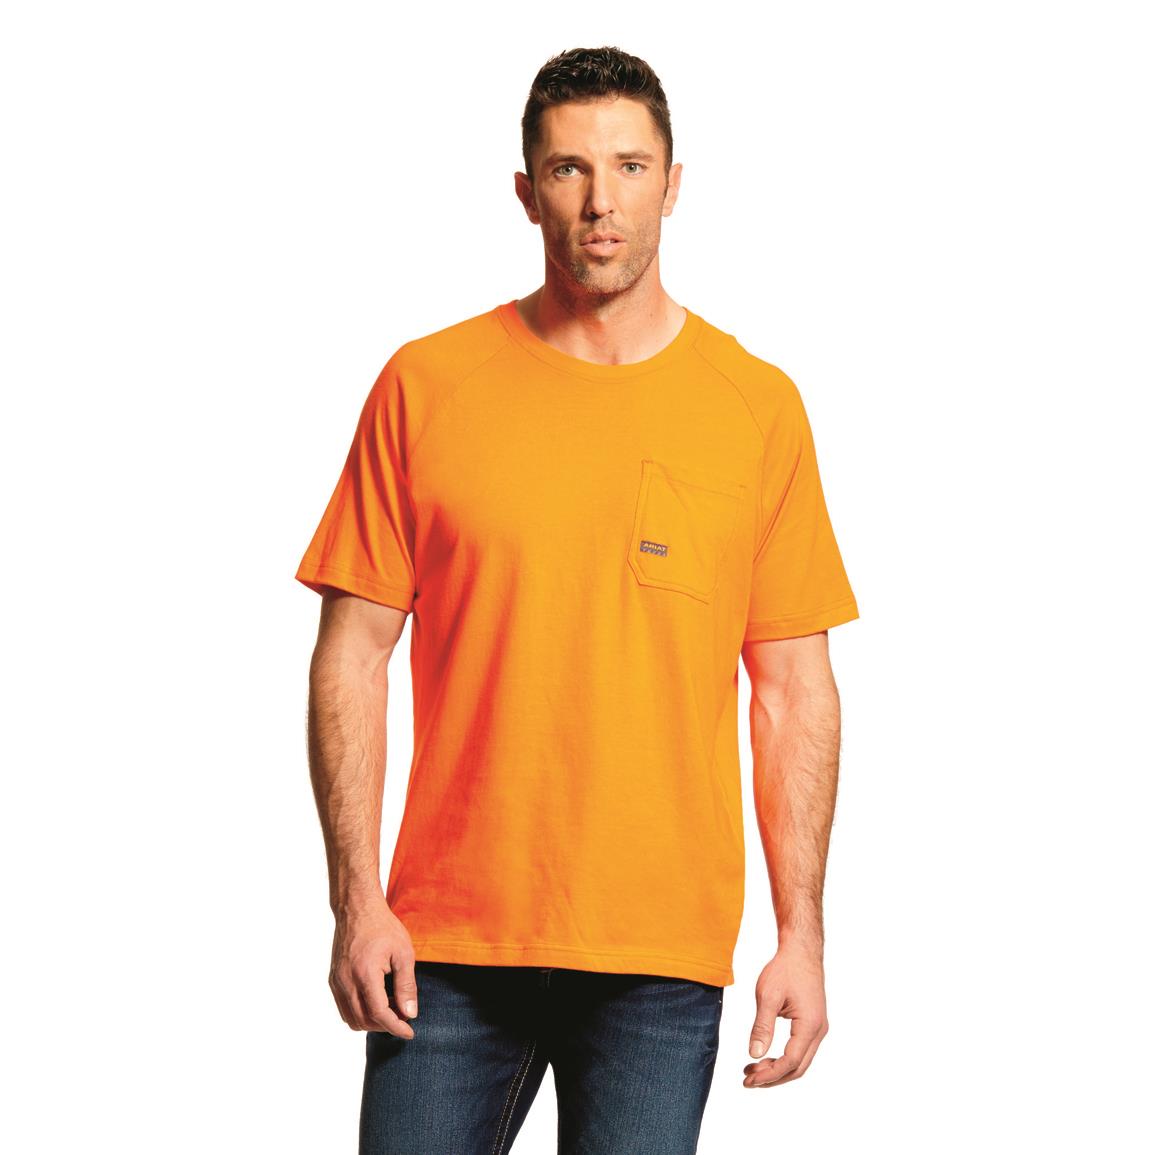 Hooey Men's Flag T-Shirt - 734638, T-Shirts at Sportsman's Guide